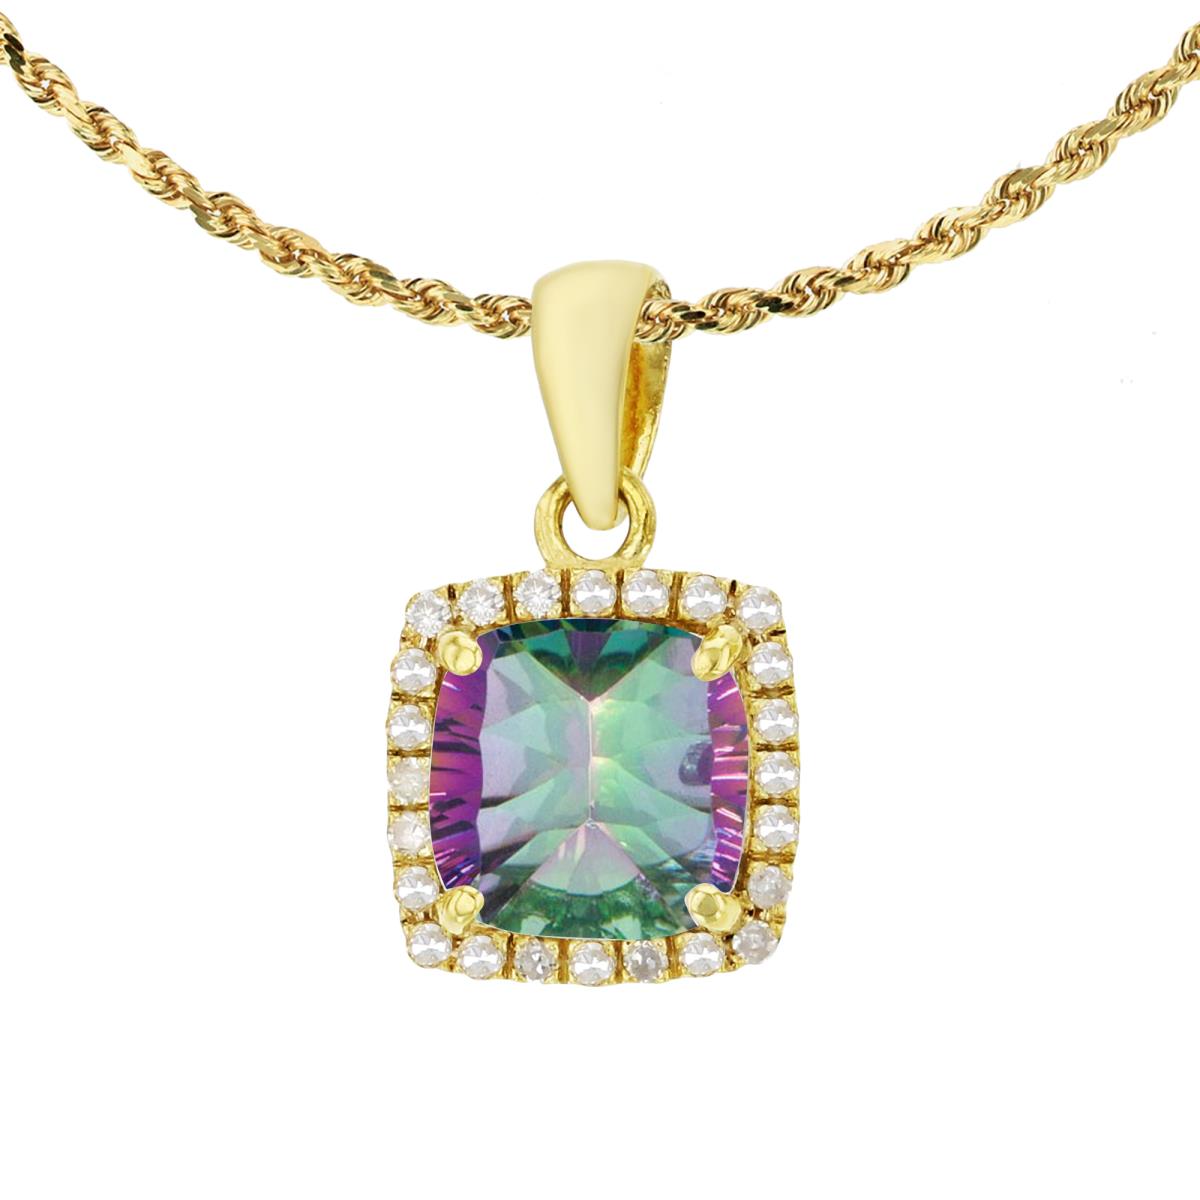 10K Yellow Gold 7mm Cushion Mystic Green Topaz & 0.12 CTTW Diamond Halo 18" Rope Chain Necklace